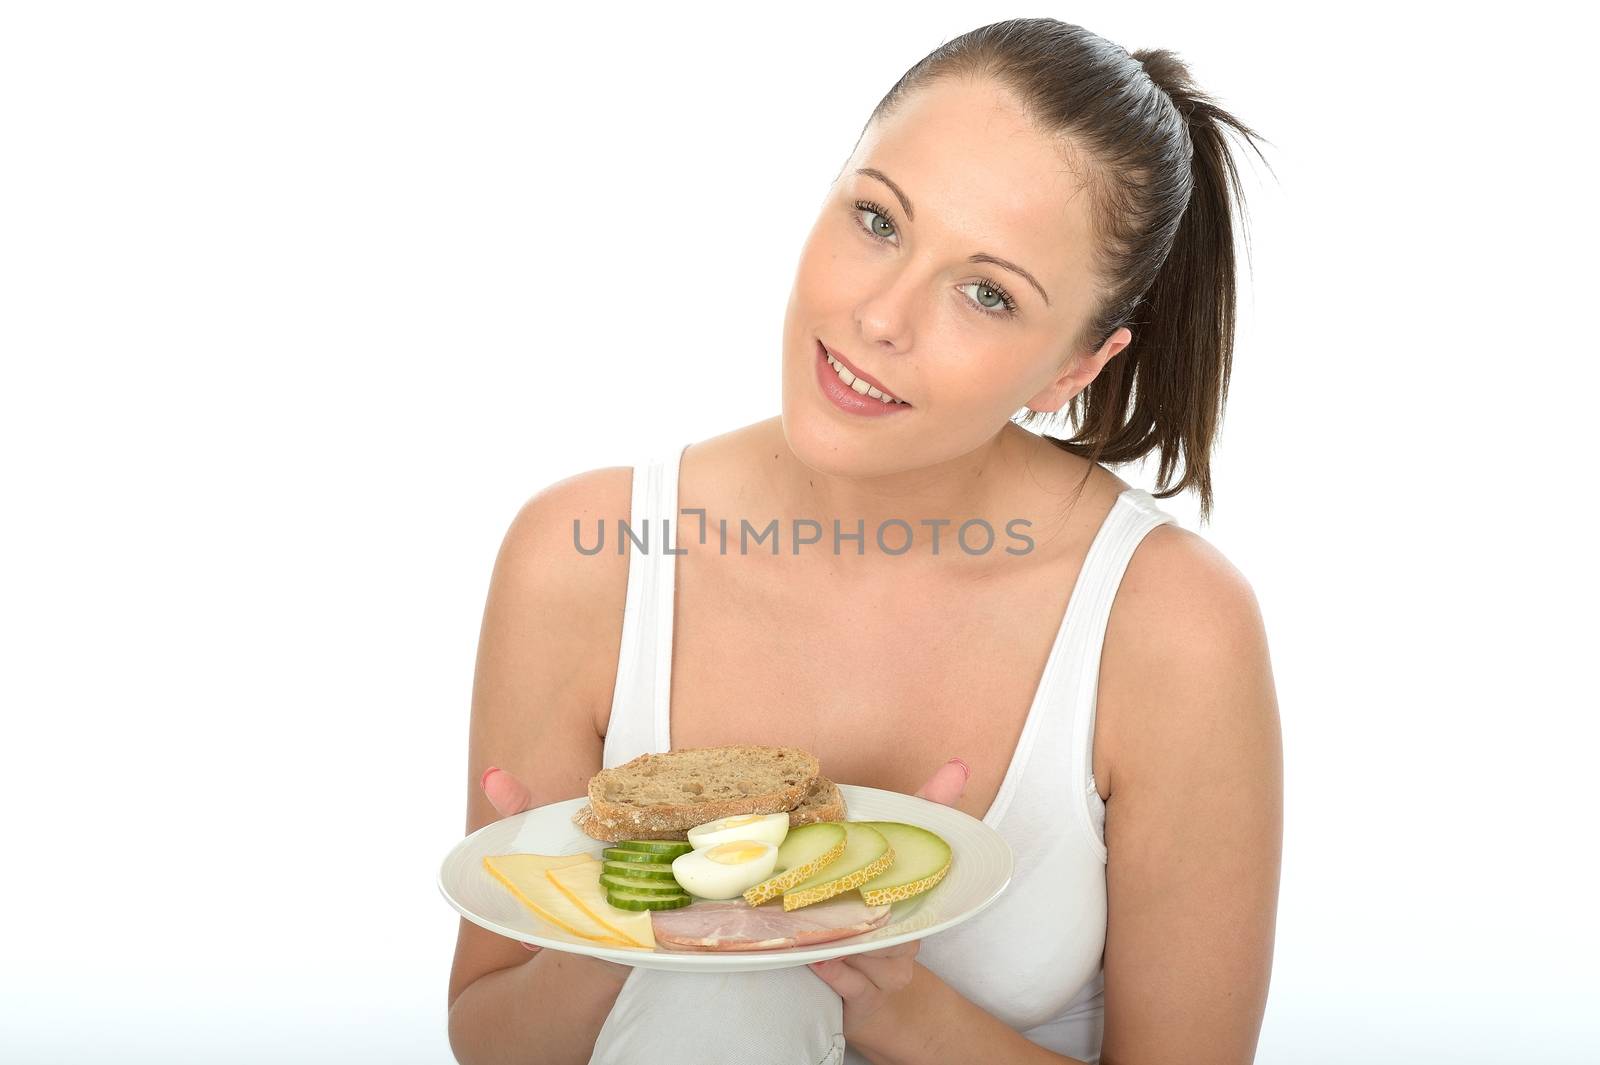 Healthy Young Woman Holding a Plate of a Typical Norwegian or Sc by Whiteboxmedia